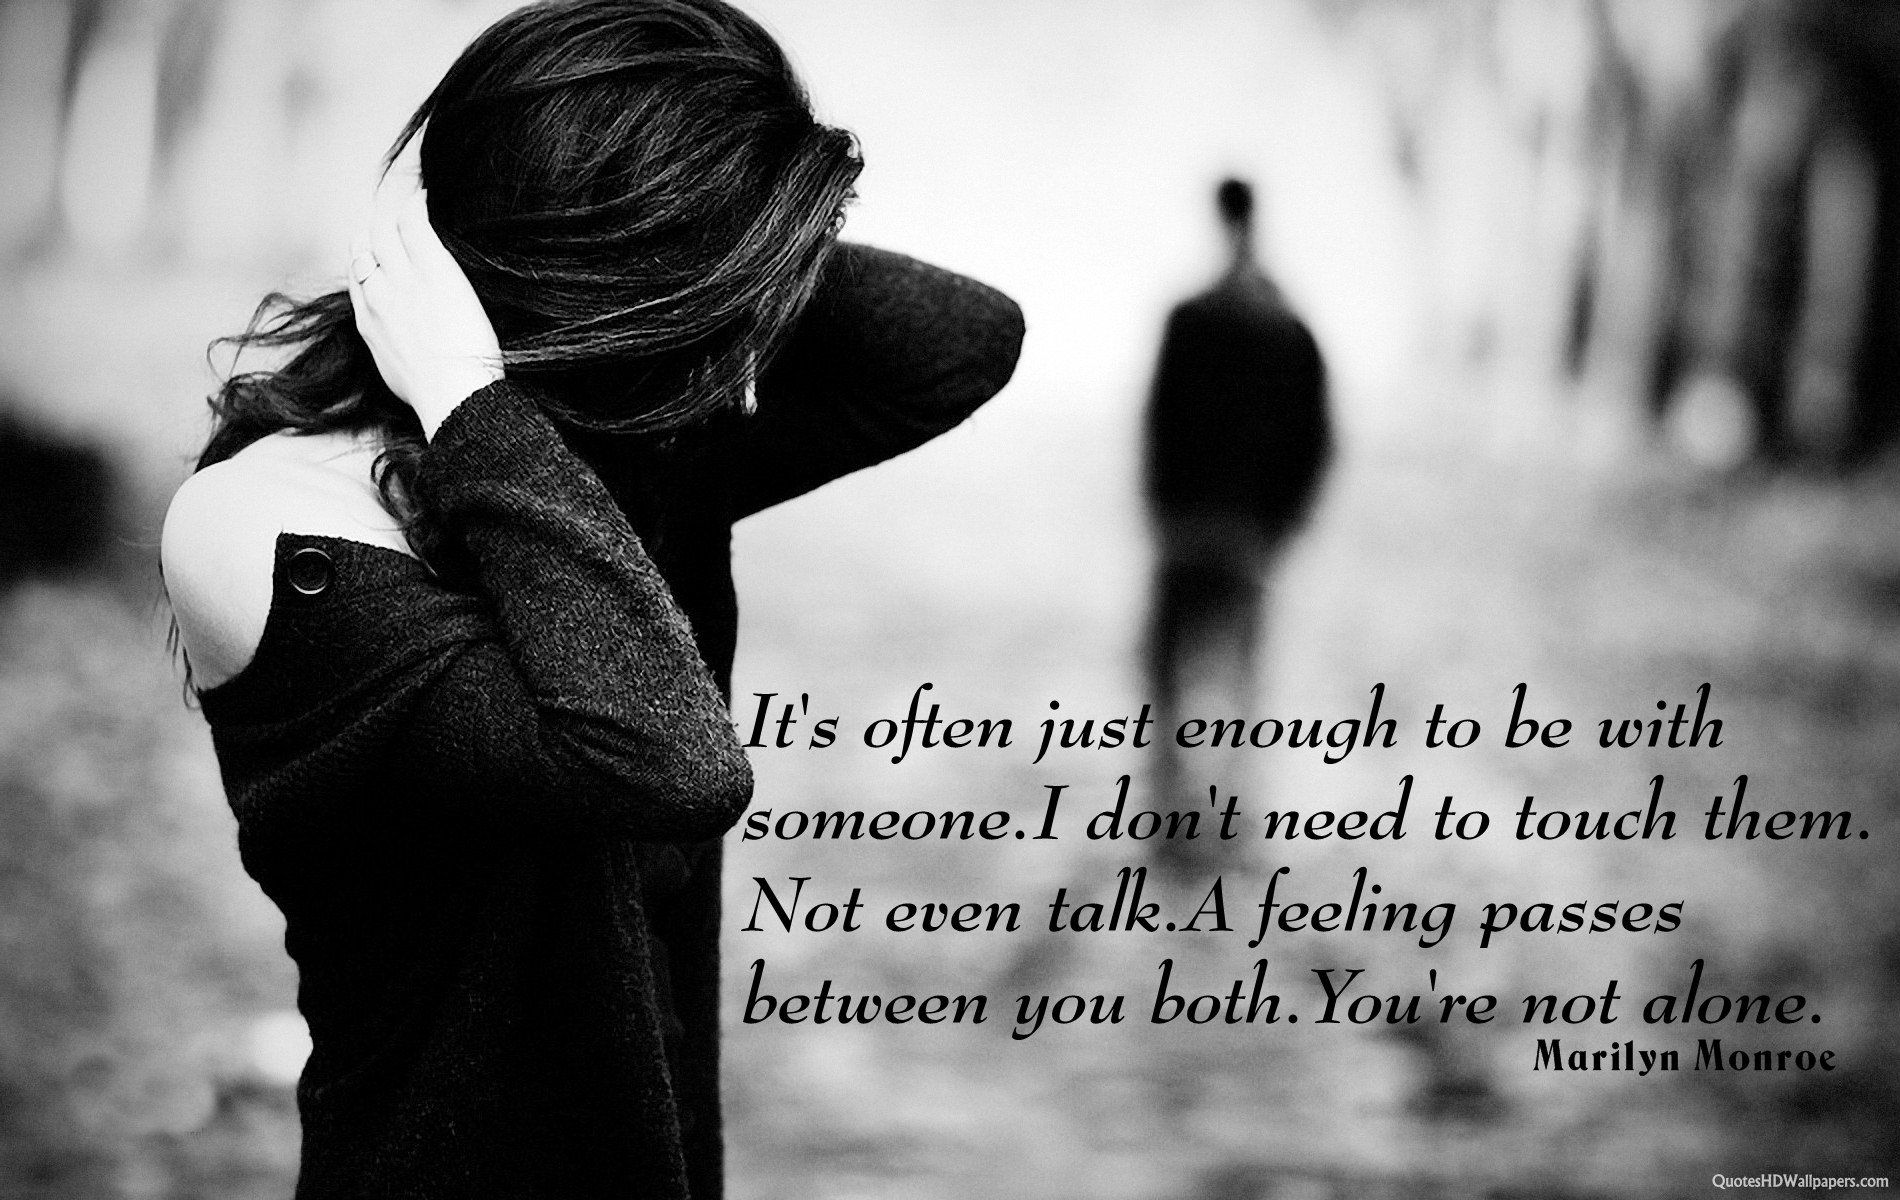 sad love quotes wallpaper,photograph,black and white,friendship,monochrome photography,text